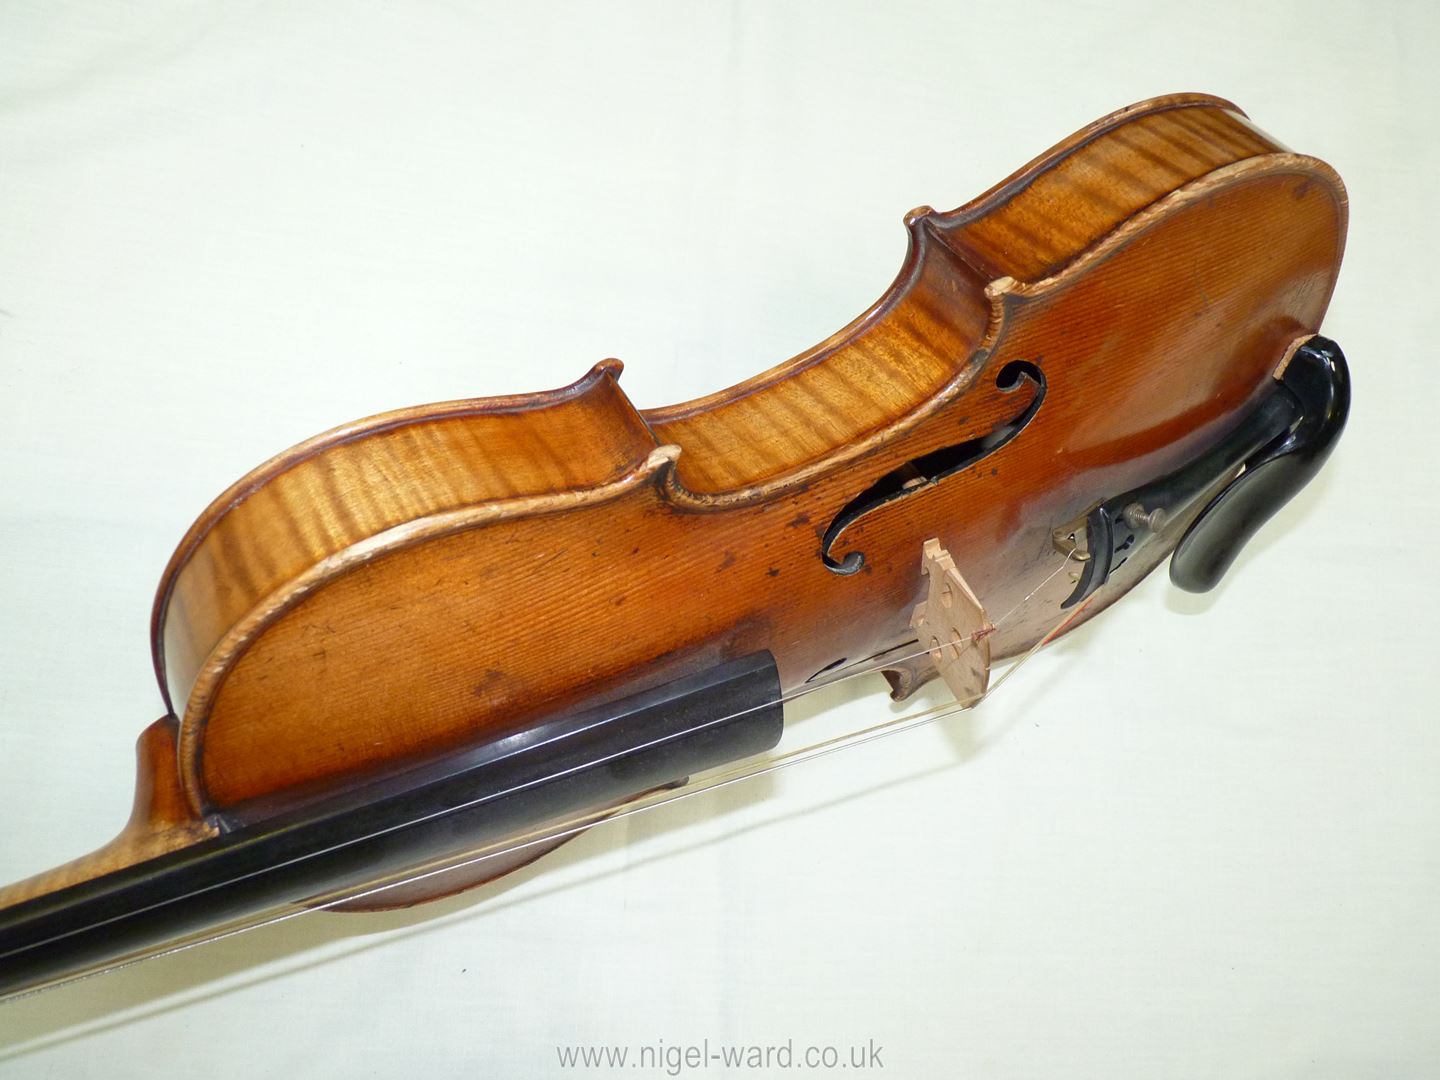 An antique violin having a well-carved scroll and nicely figured body including the back, - Image 15 of 49